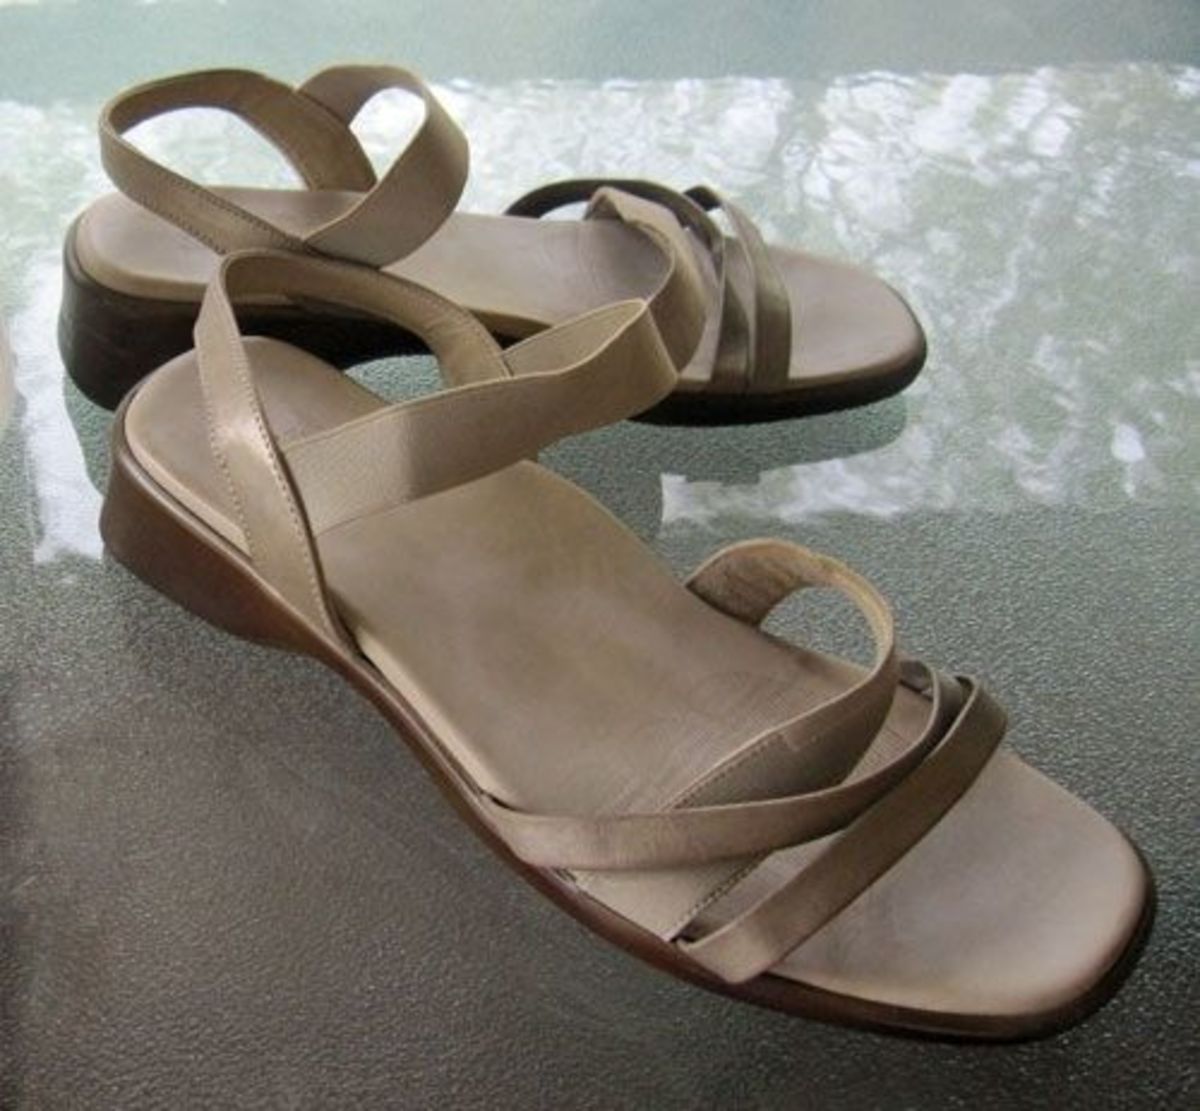 Old beige leather comfort sandals prior to being painted and embellished